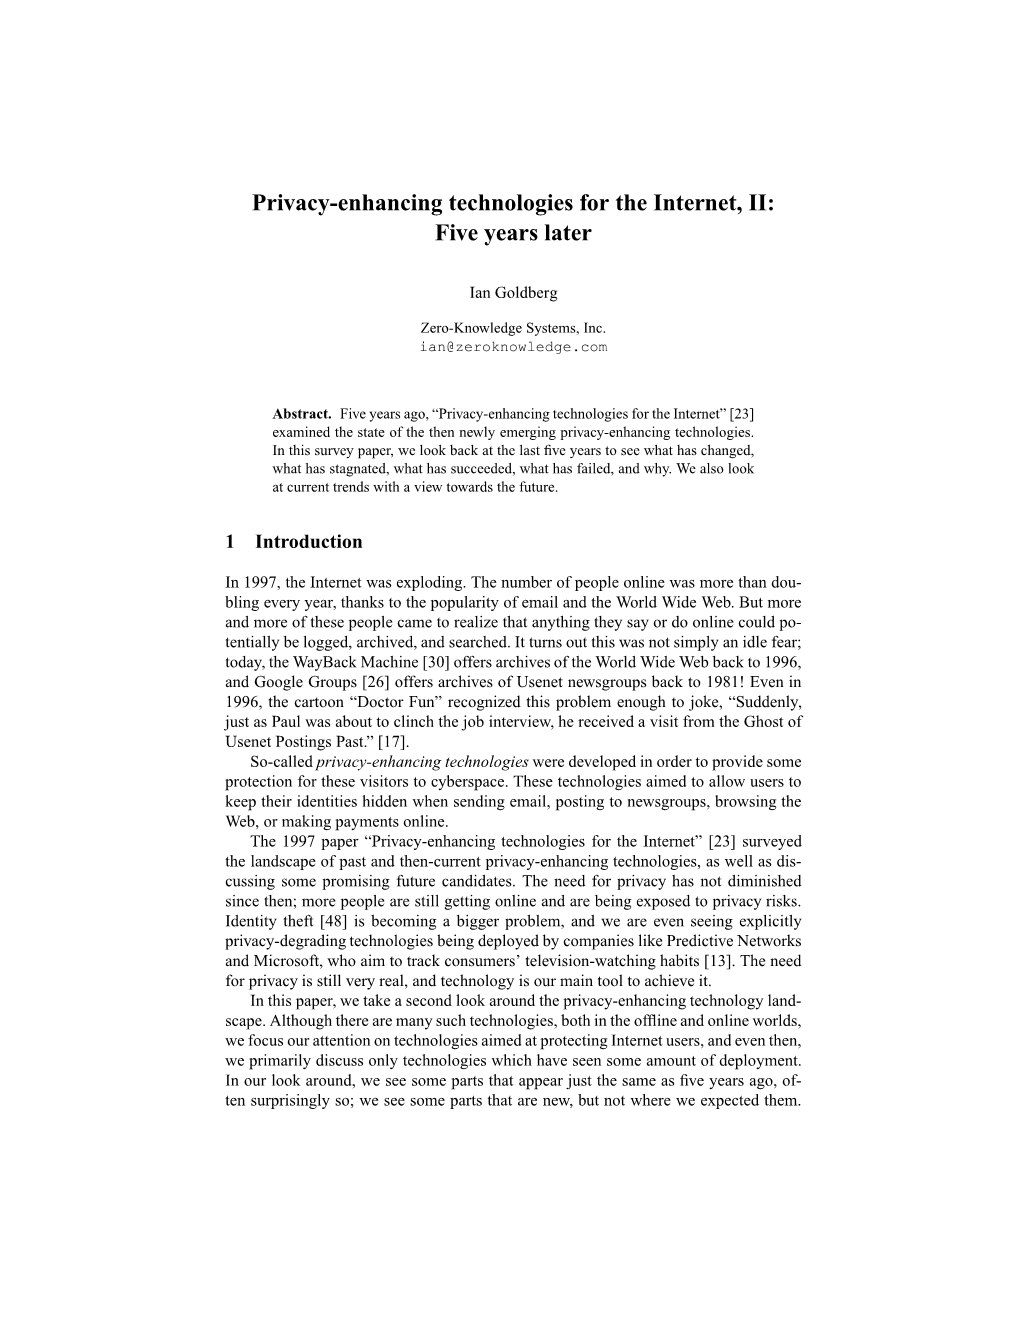 Privacy-Enhancing Technologies for the Internet, II: Five Years Later